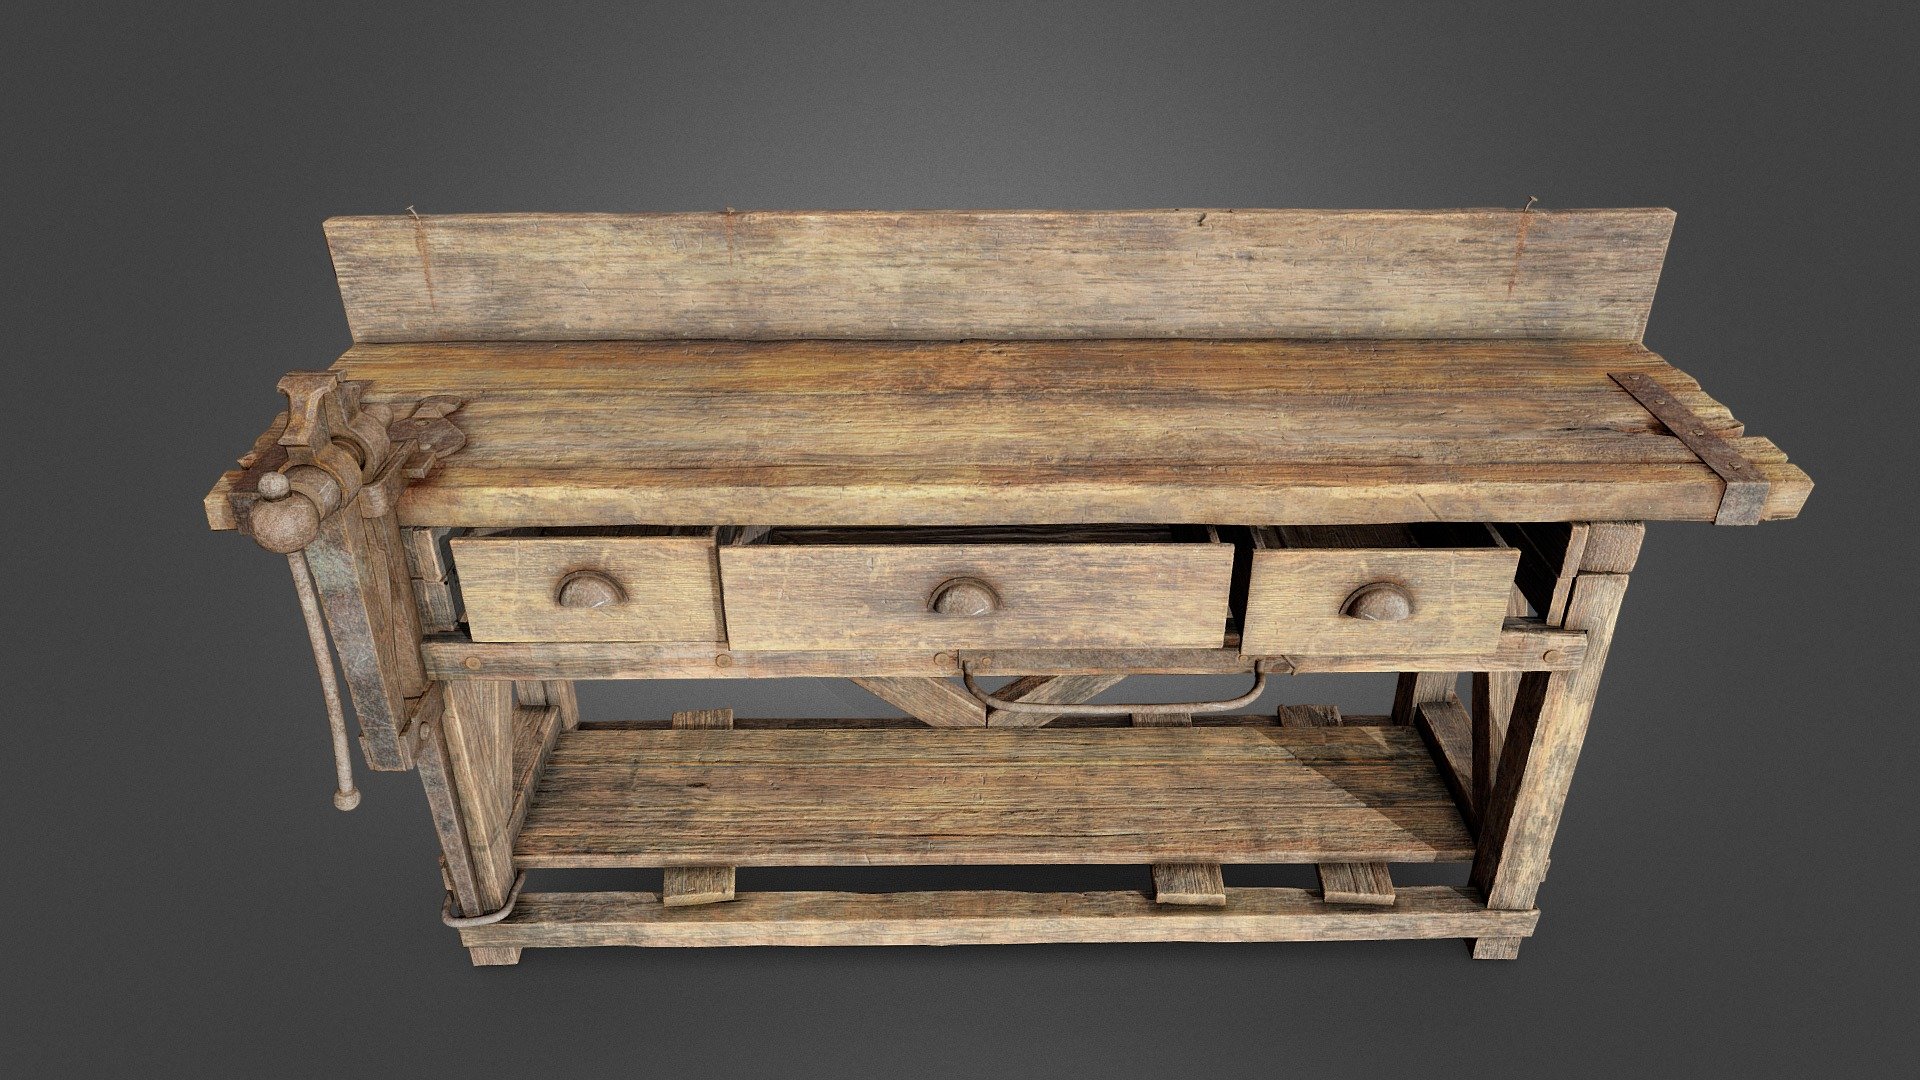 Workbench was modeled in Autodesk Maya 2023. Sculpted in Zbrush and textured in Substance Painter. Hope you like it 3d model